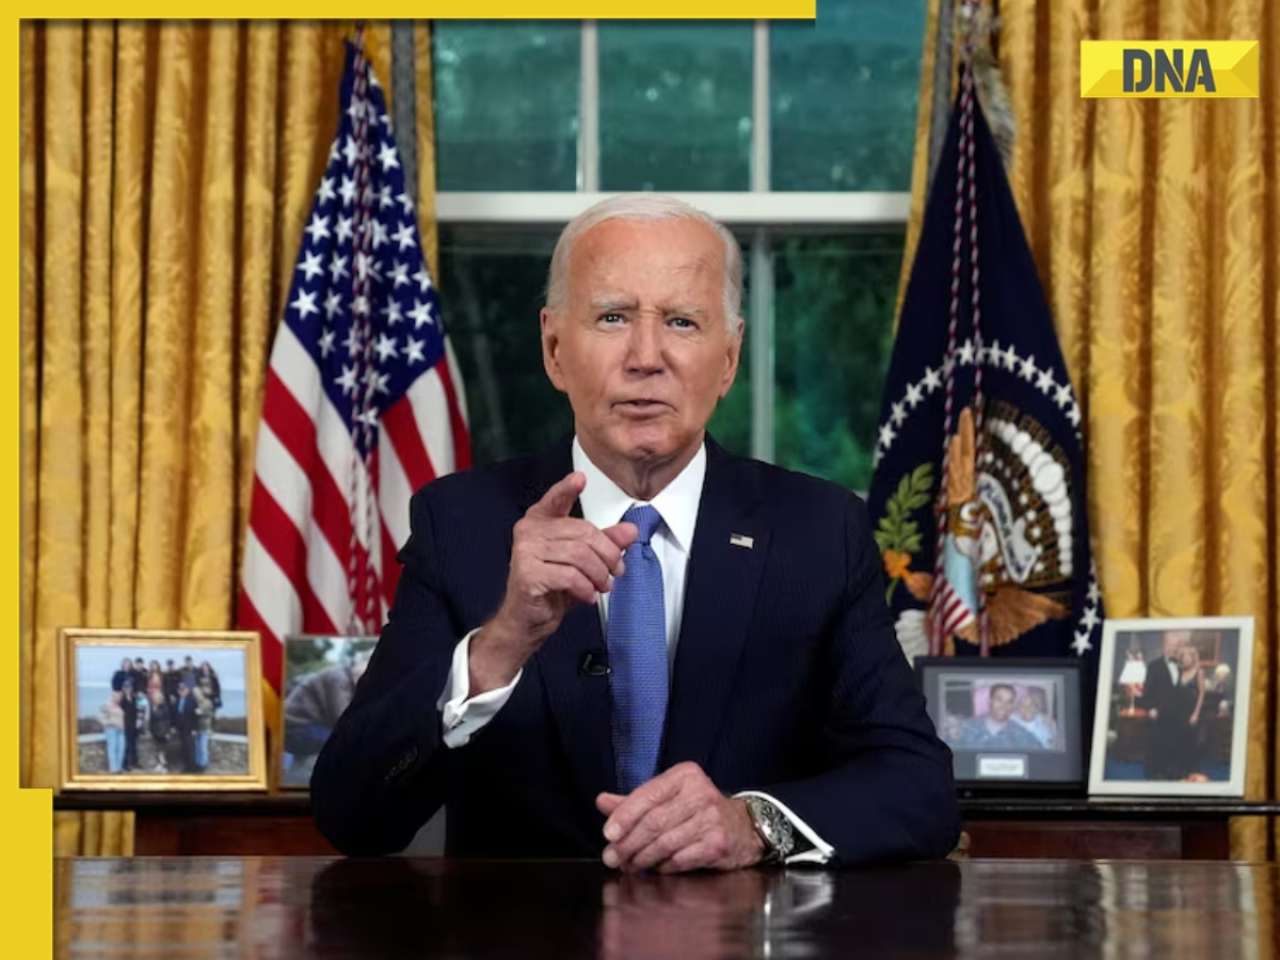 'I revere this office but...': US President Biden addresses decision to drop out of 2024 presidential race